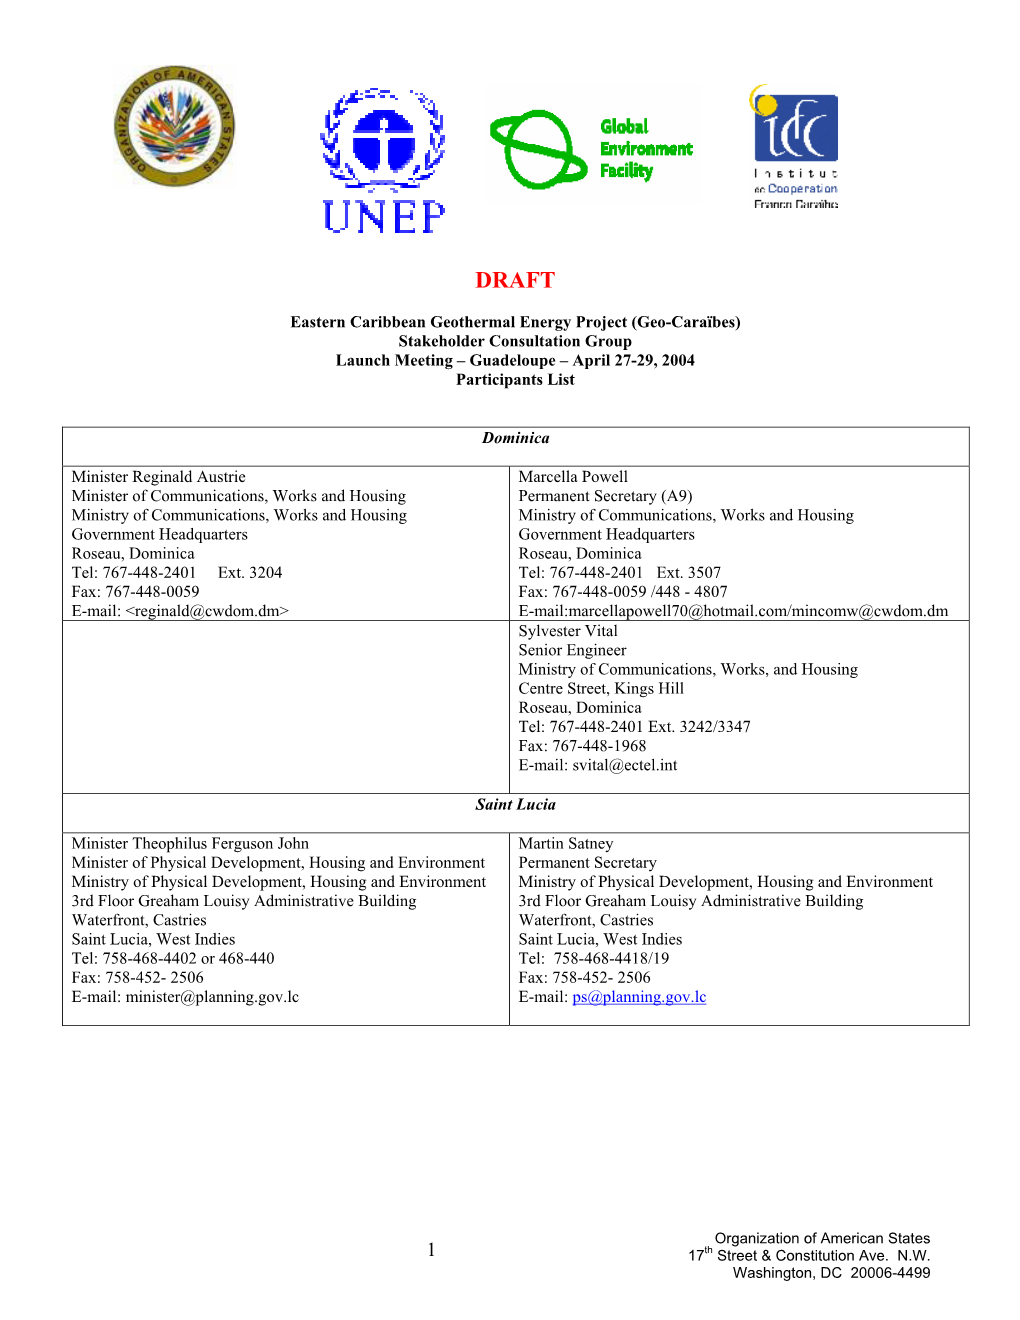 Geo-Caraïbes) Stakeholder Consultation Group Launch Meeting – Guadeloupe – April 27-29, 2004 Participants List